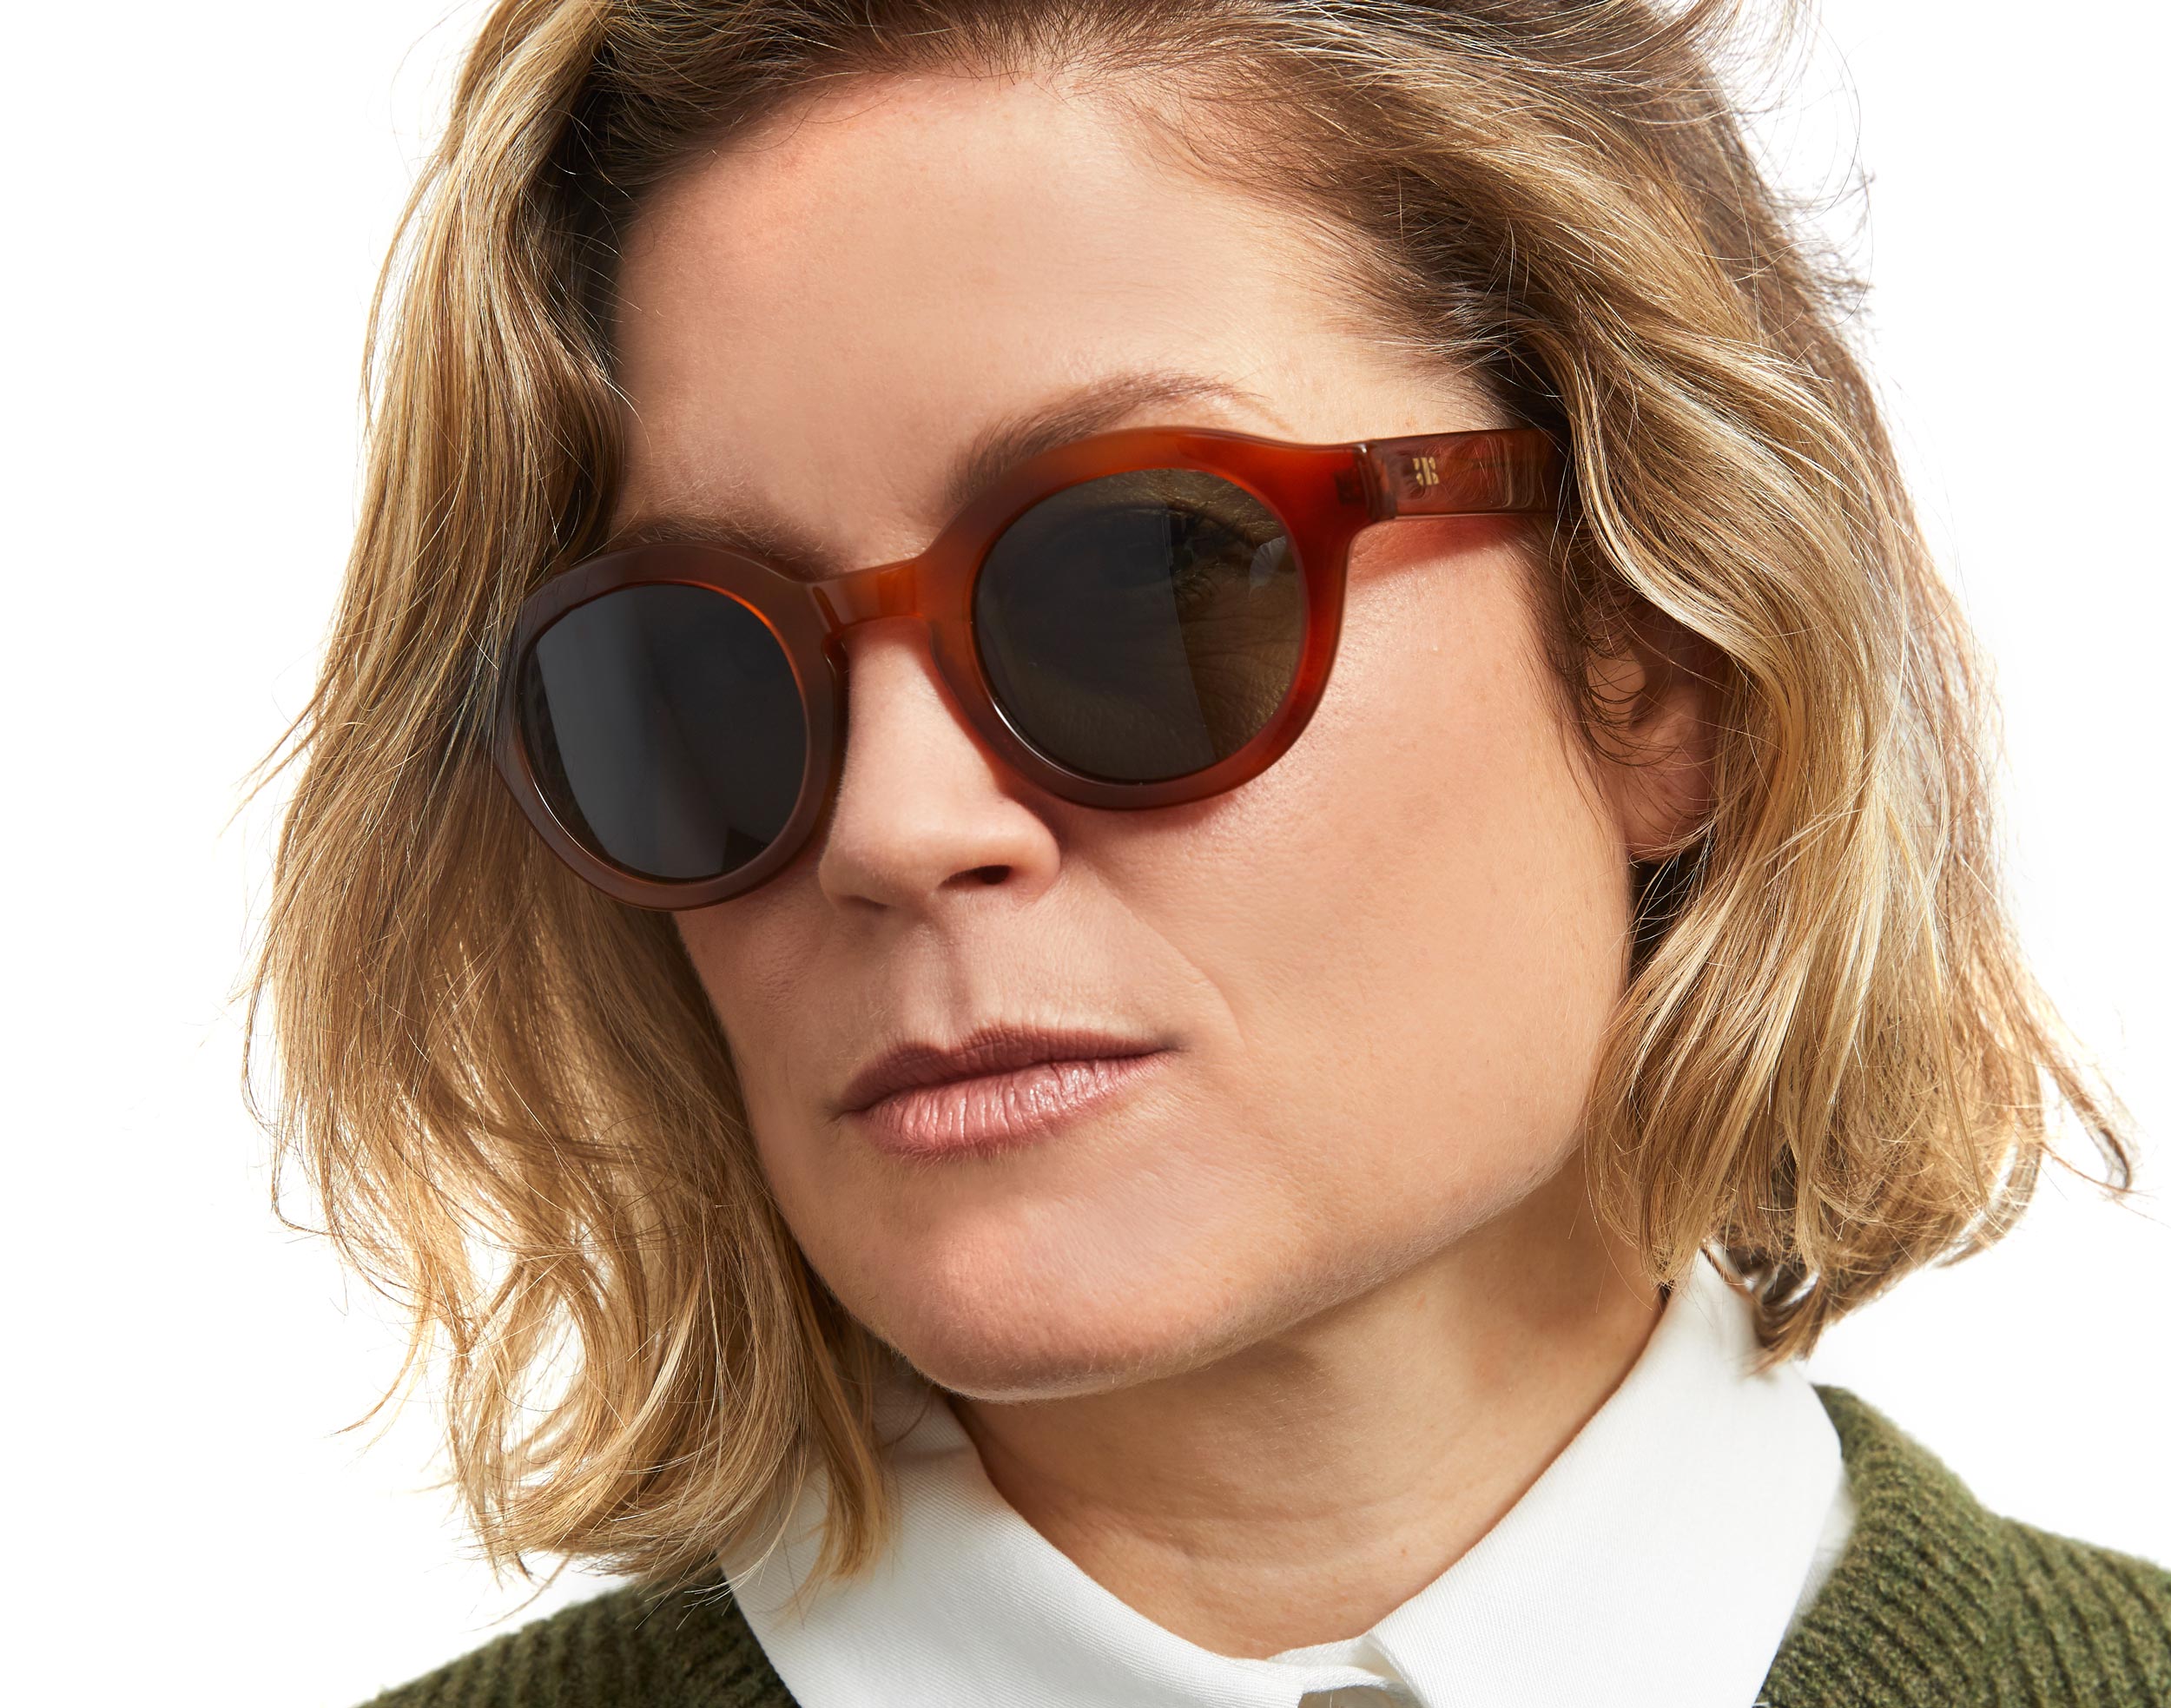 Photo of a man or woman wearing Eden Sun Cognac Sun Glasses by French Kiwis